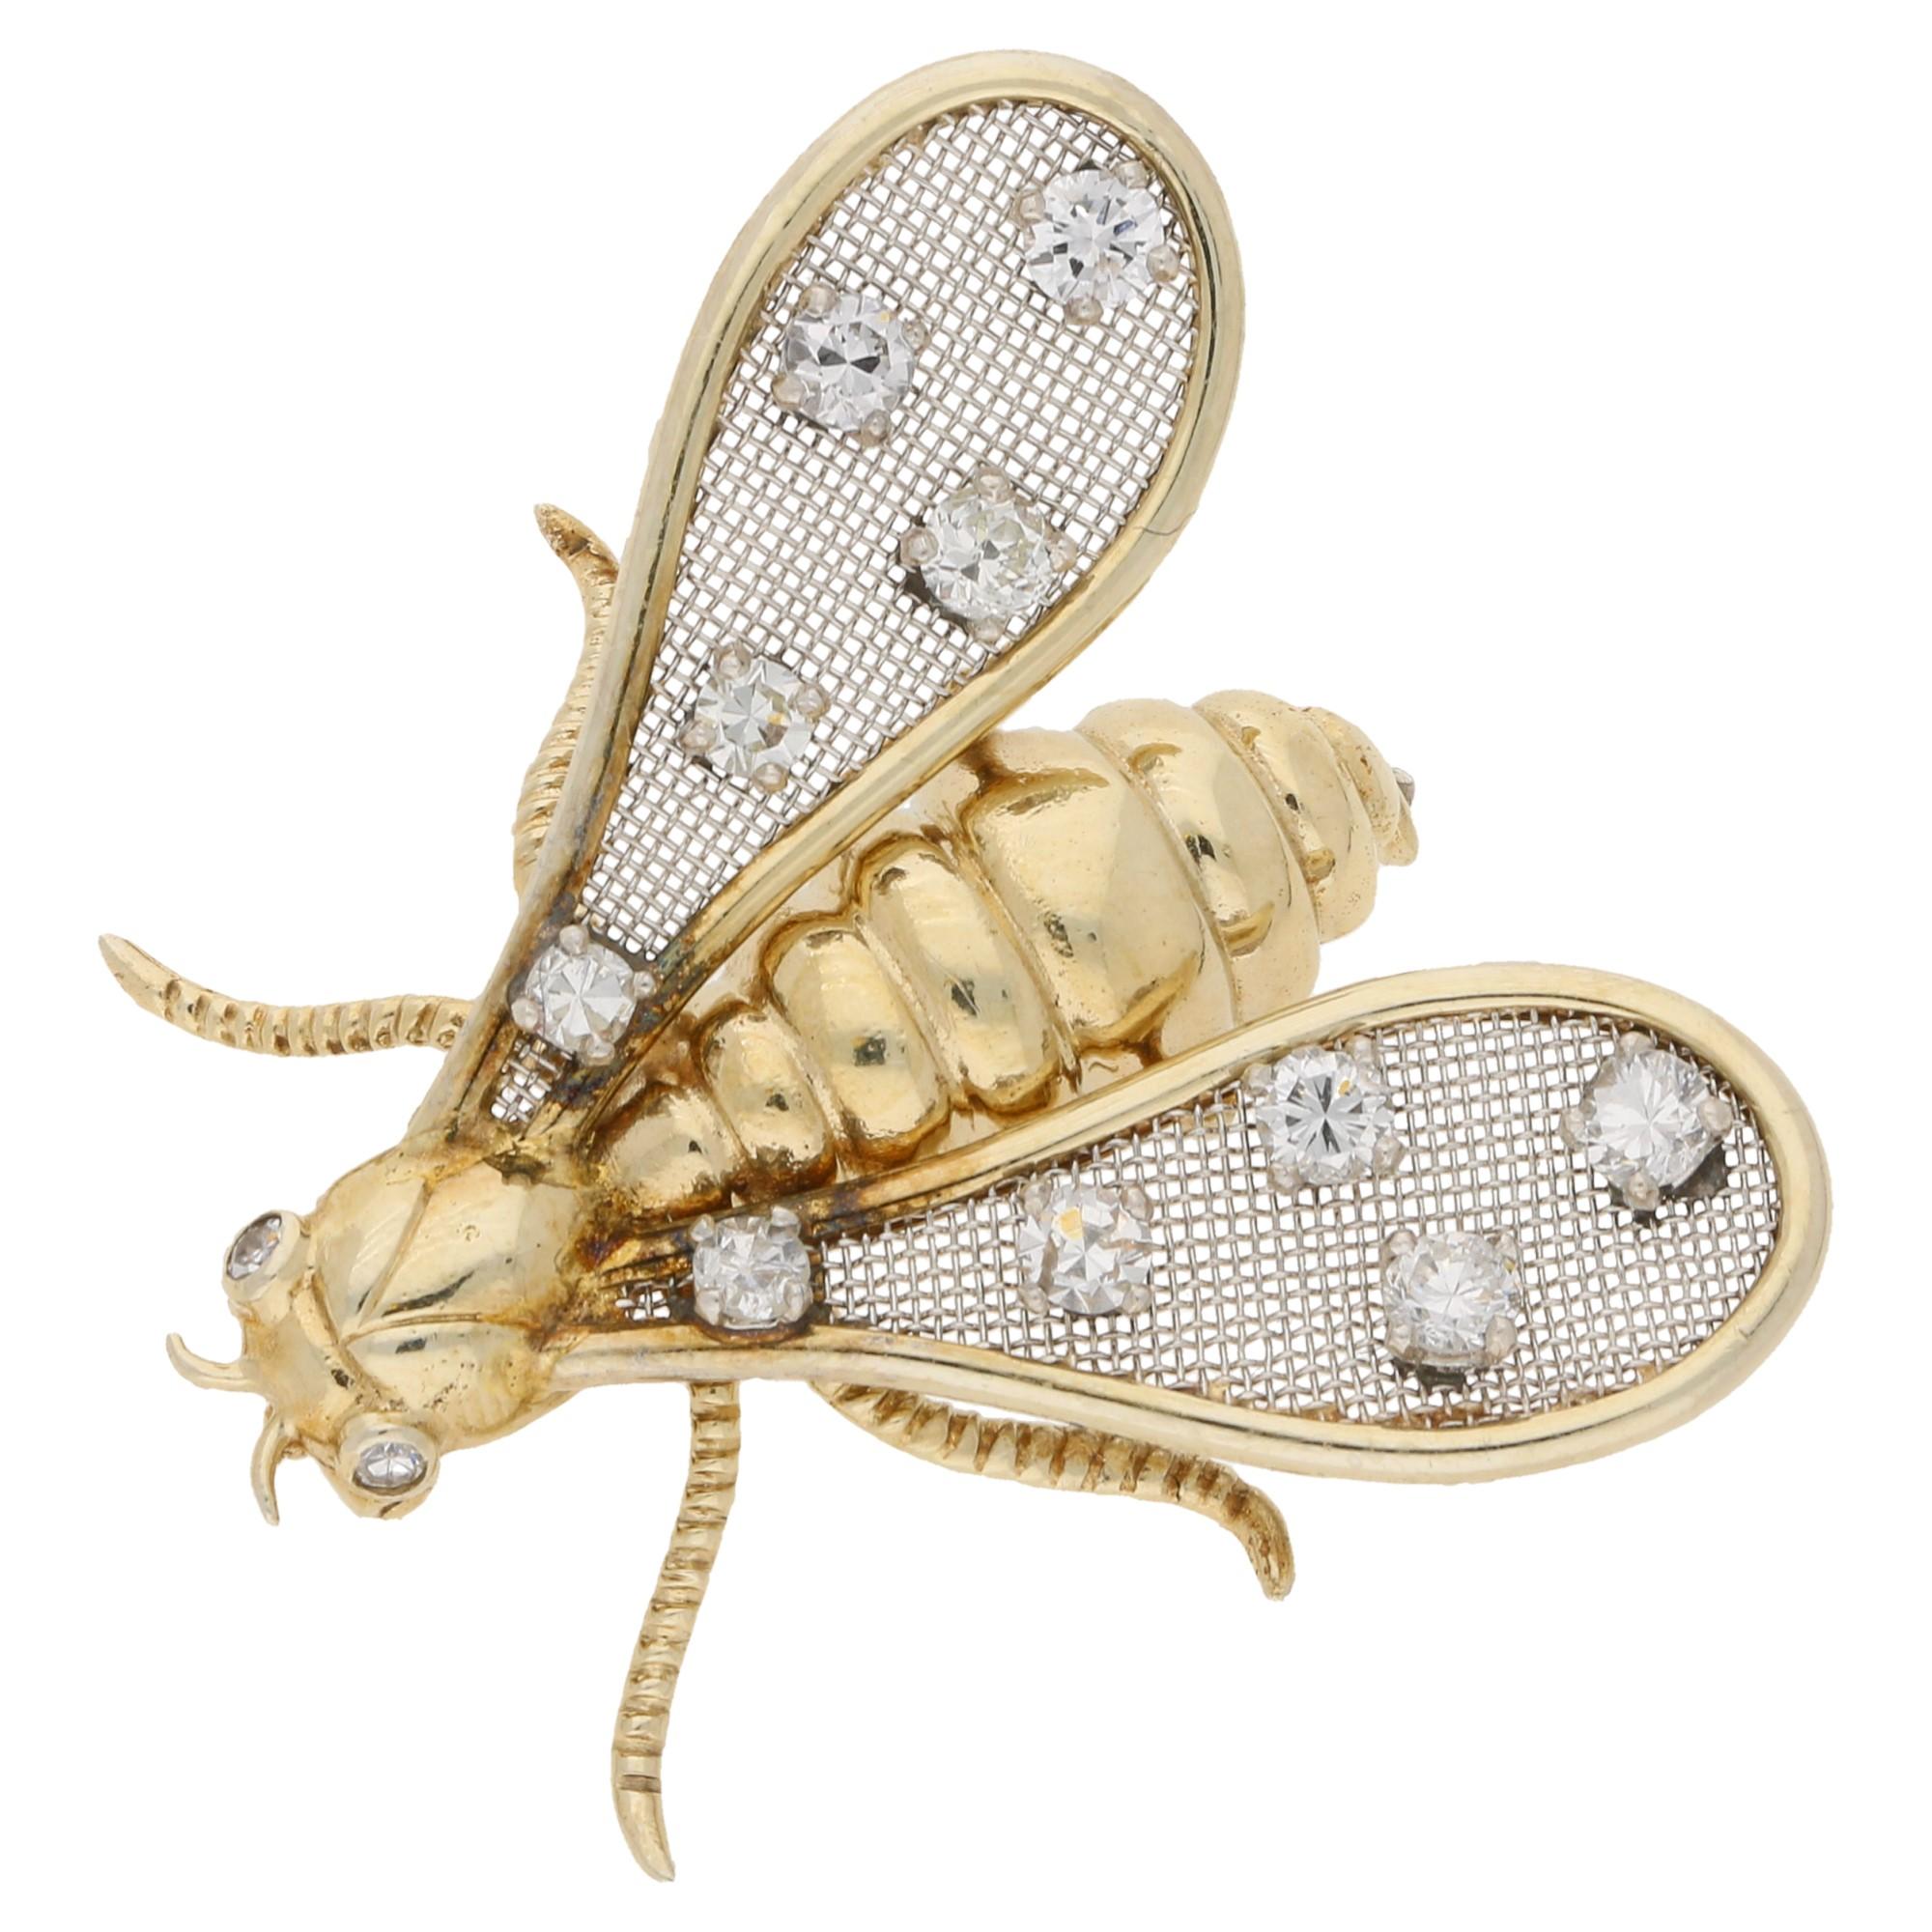 Chaumet Paris Diamond Insect Brooch Set in 18k Yellow and White 